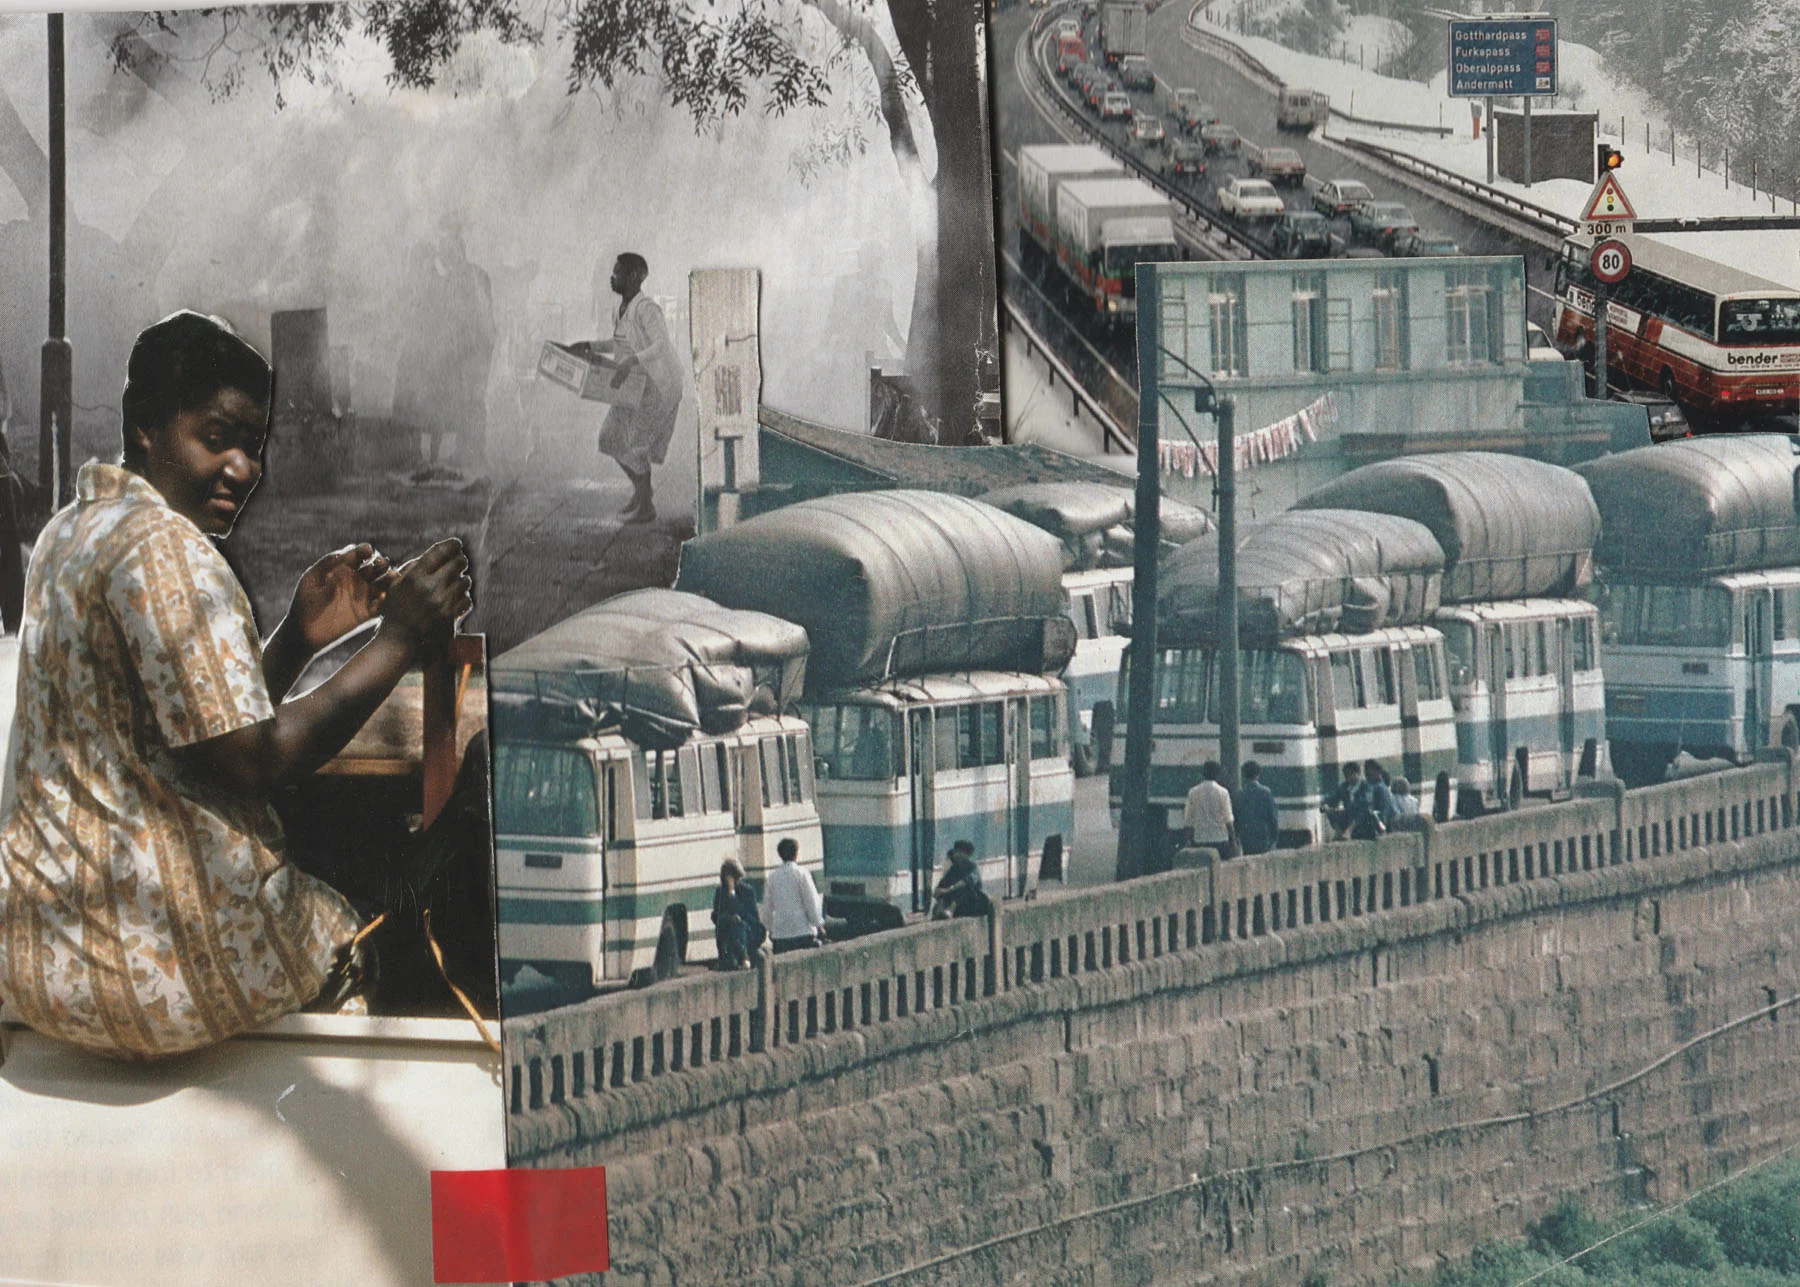 A photo collage featuring cutouts from images of multiple traffic jams, with a woman sitting in the corner of the image and turning back toward the viewer.